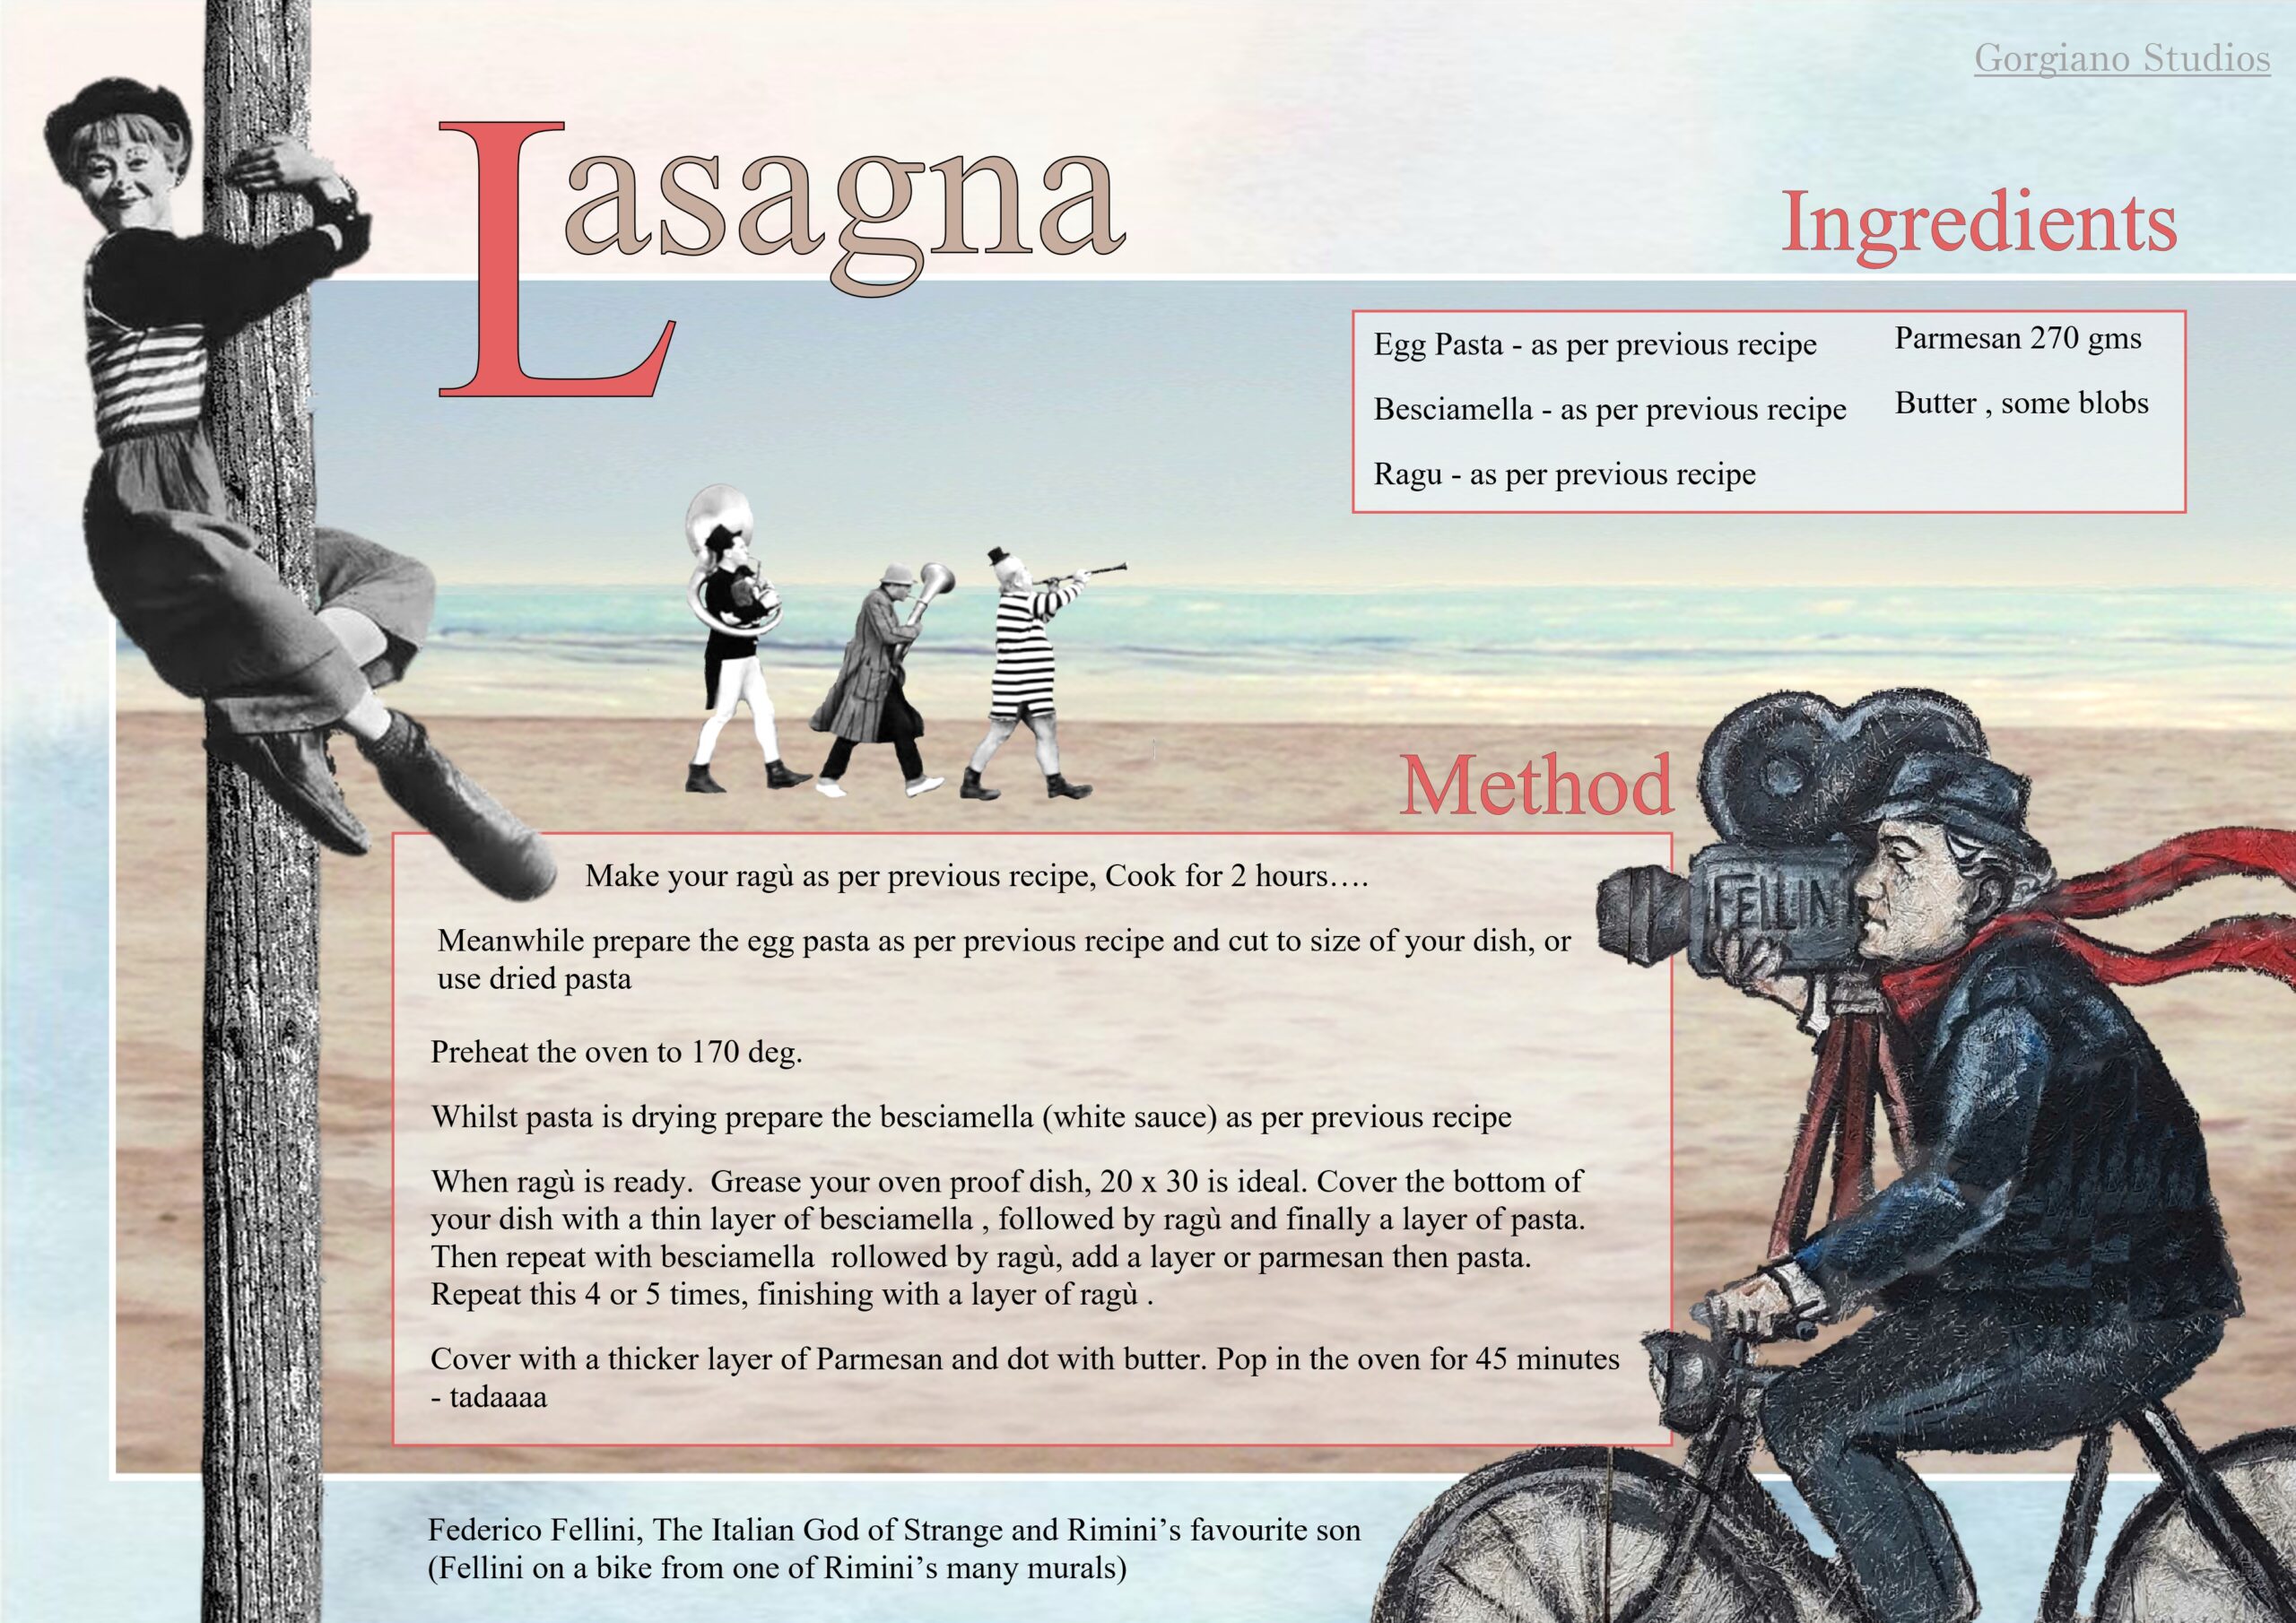 Recipe card for Lasagna from Gorgiano Studios, Andreas delicious Italian cooking illustrated by Caroline Crawford